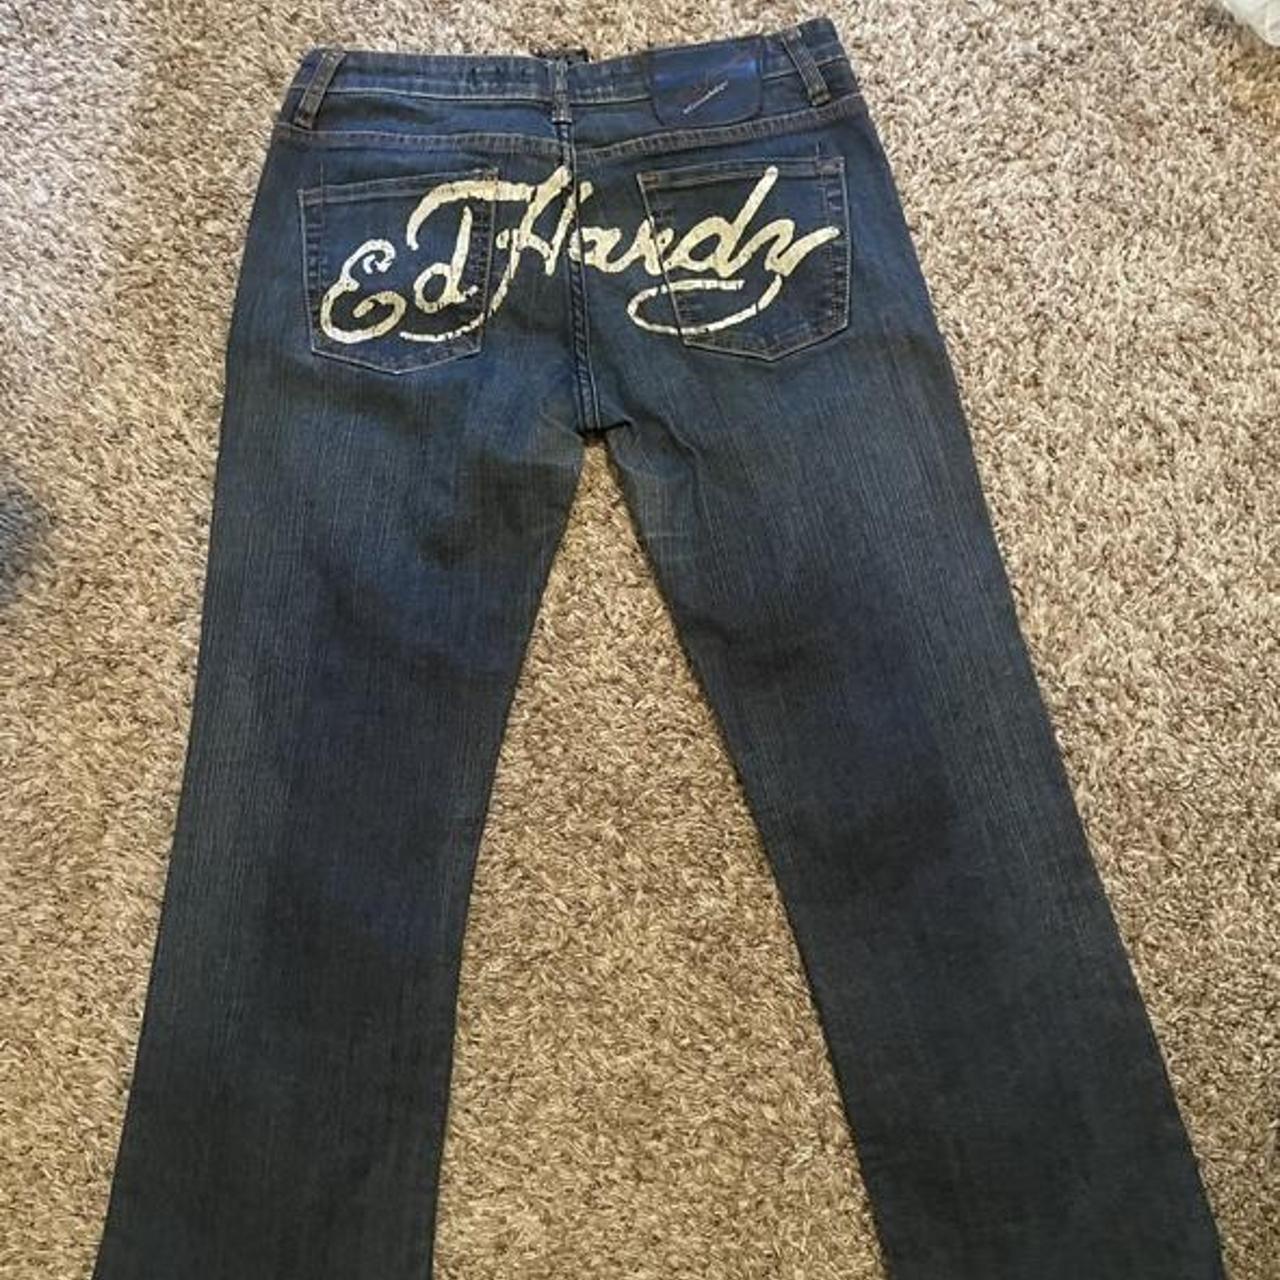 Sickest flared Ed hardy low rise spell out jeans... - Depop